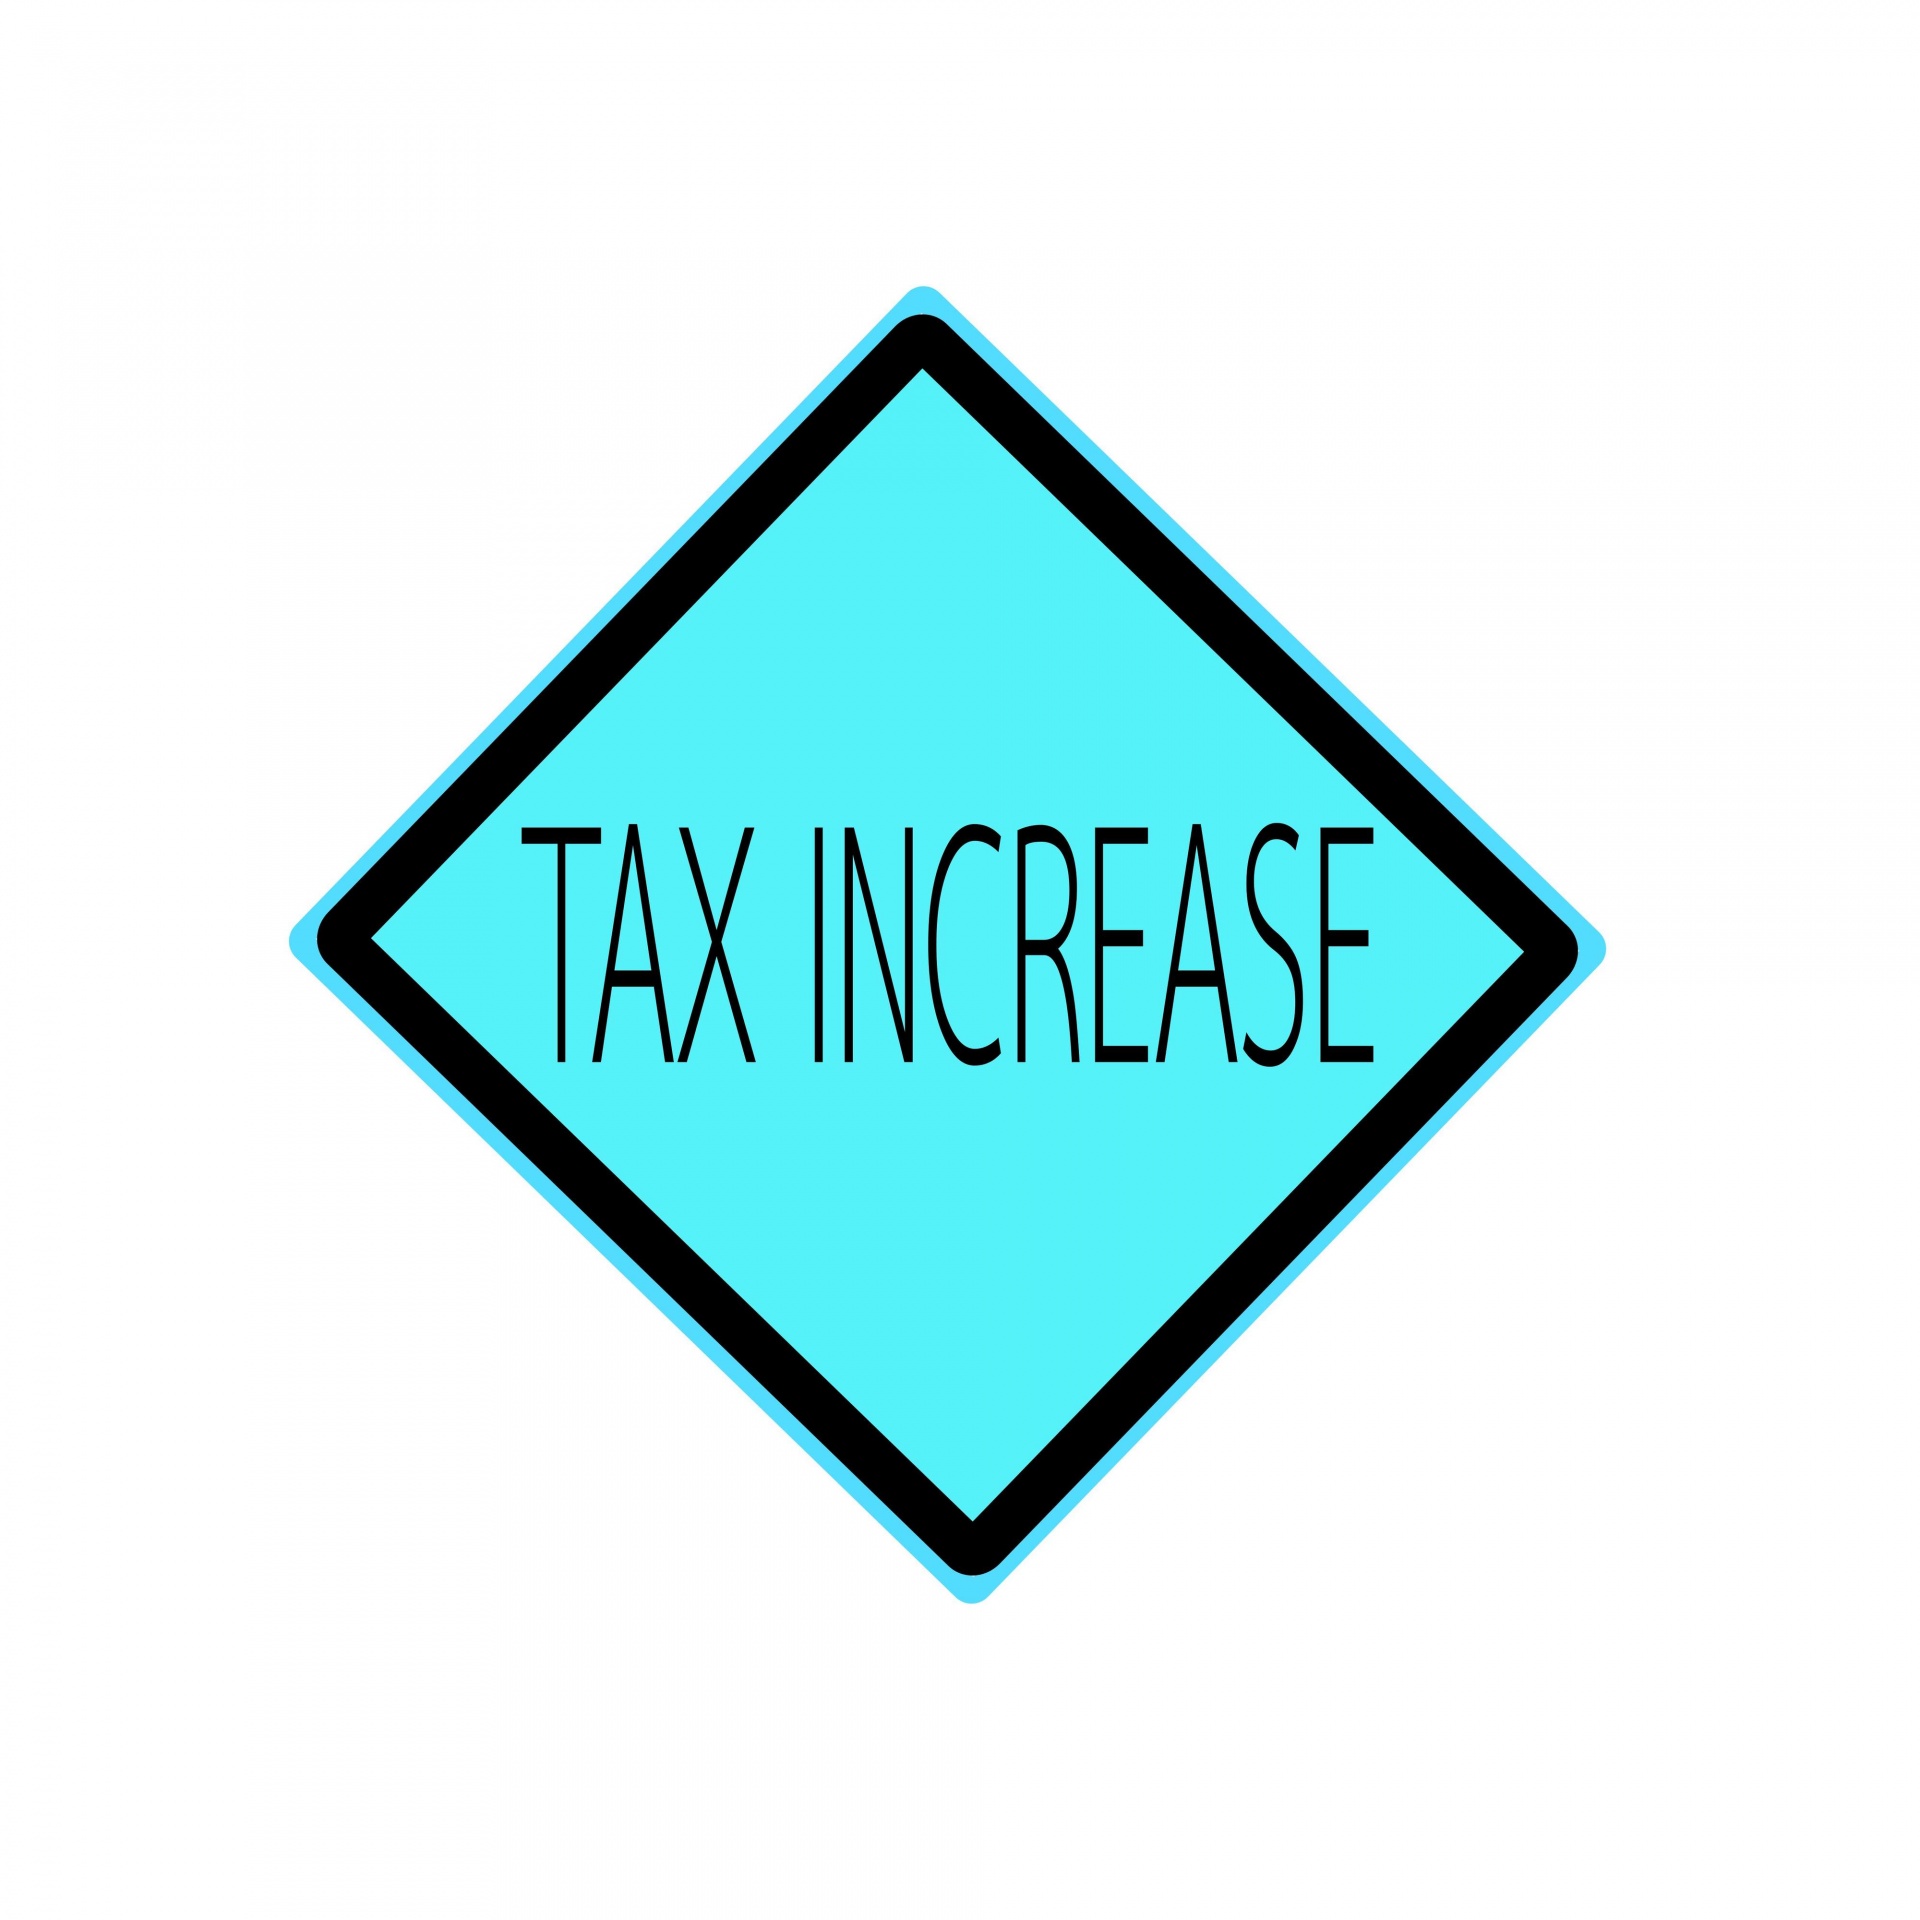 Tax Increase Black Stamp Text On Blue